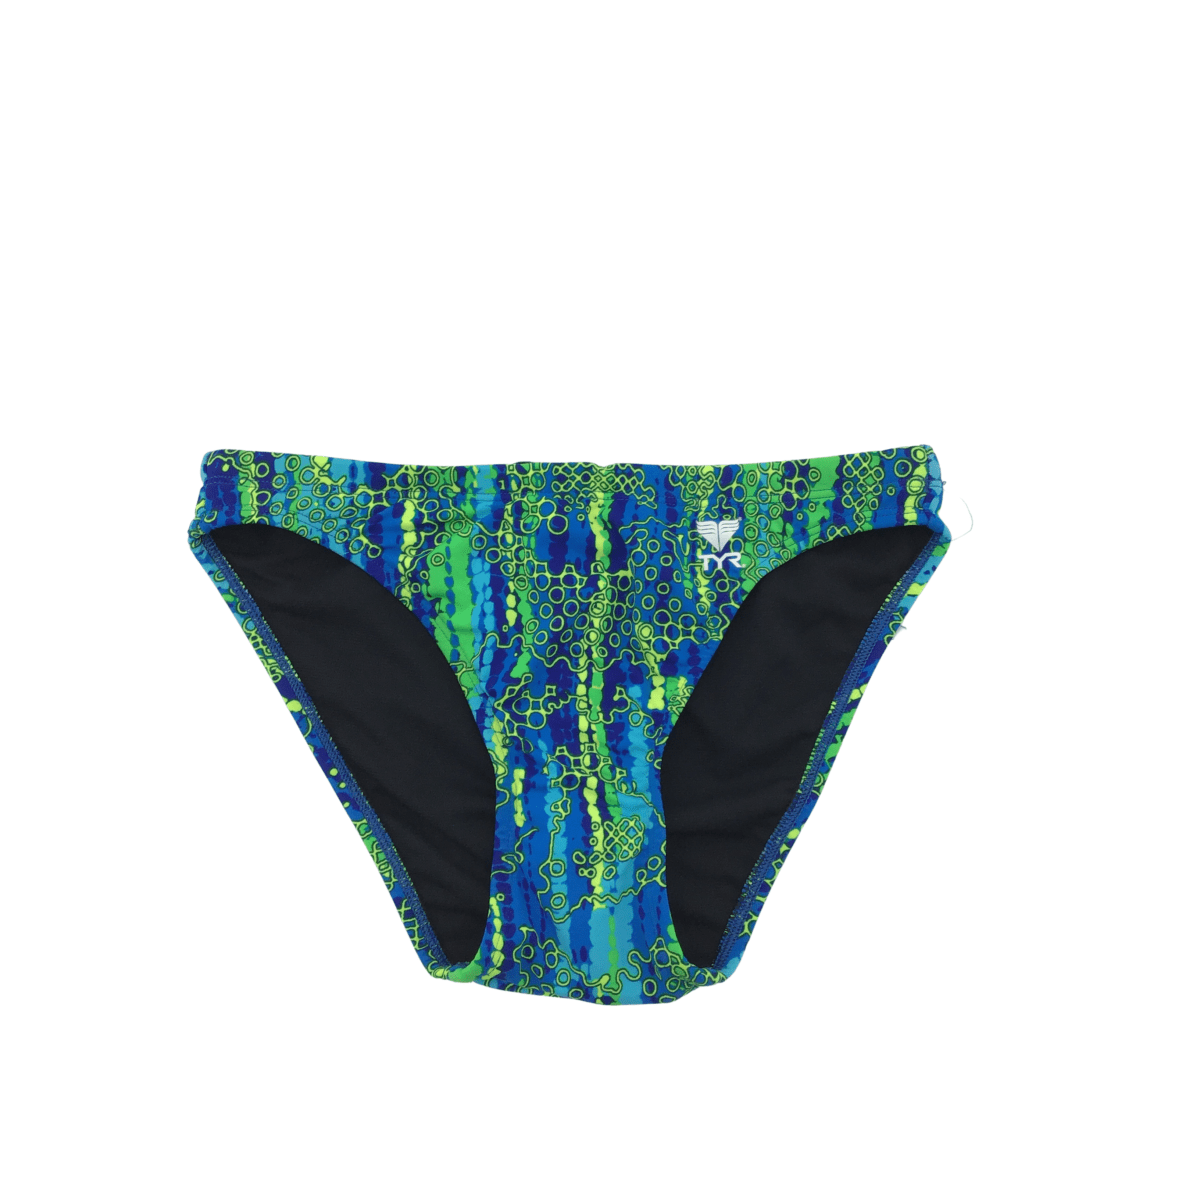 TYR bathing suit 04